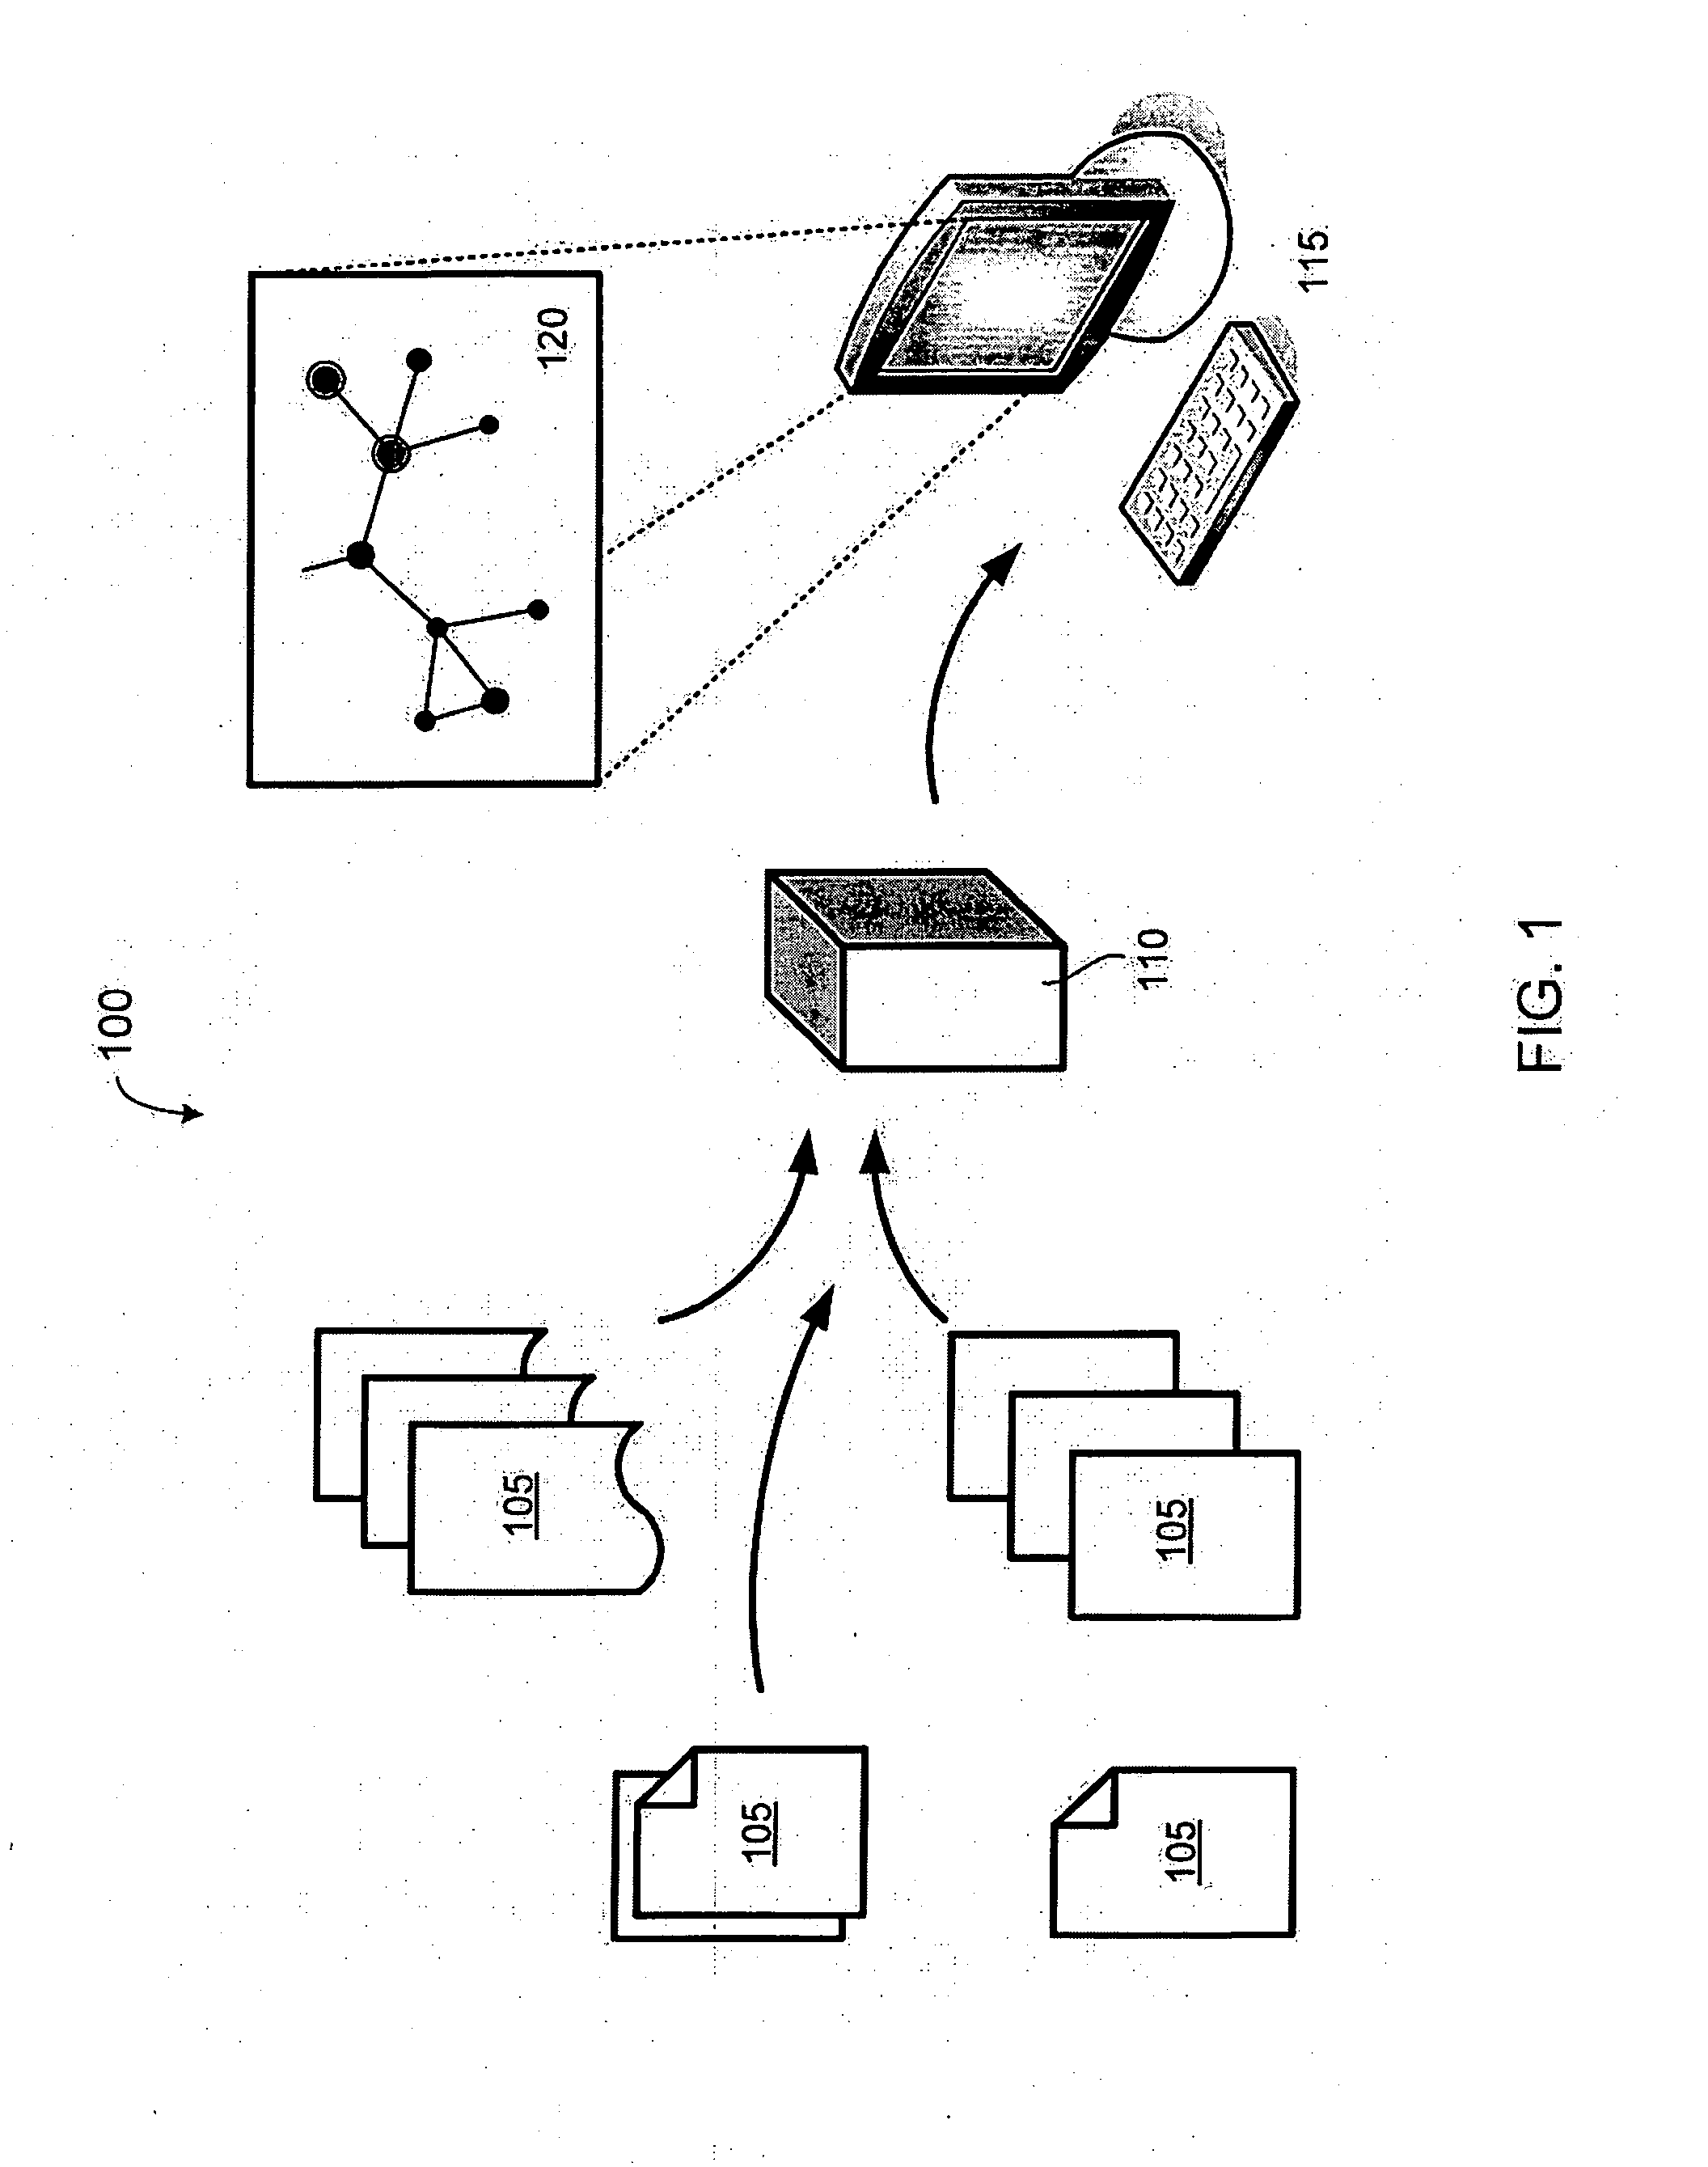 System And Methods For Clustering Large Database of Documents